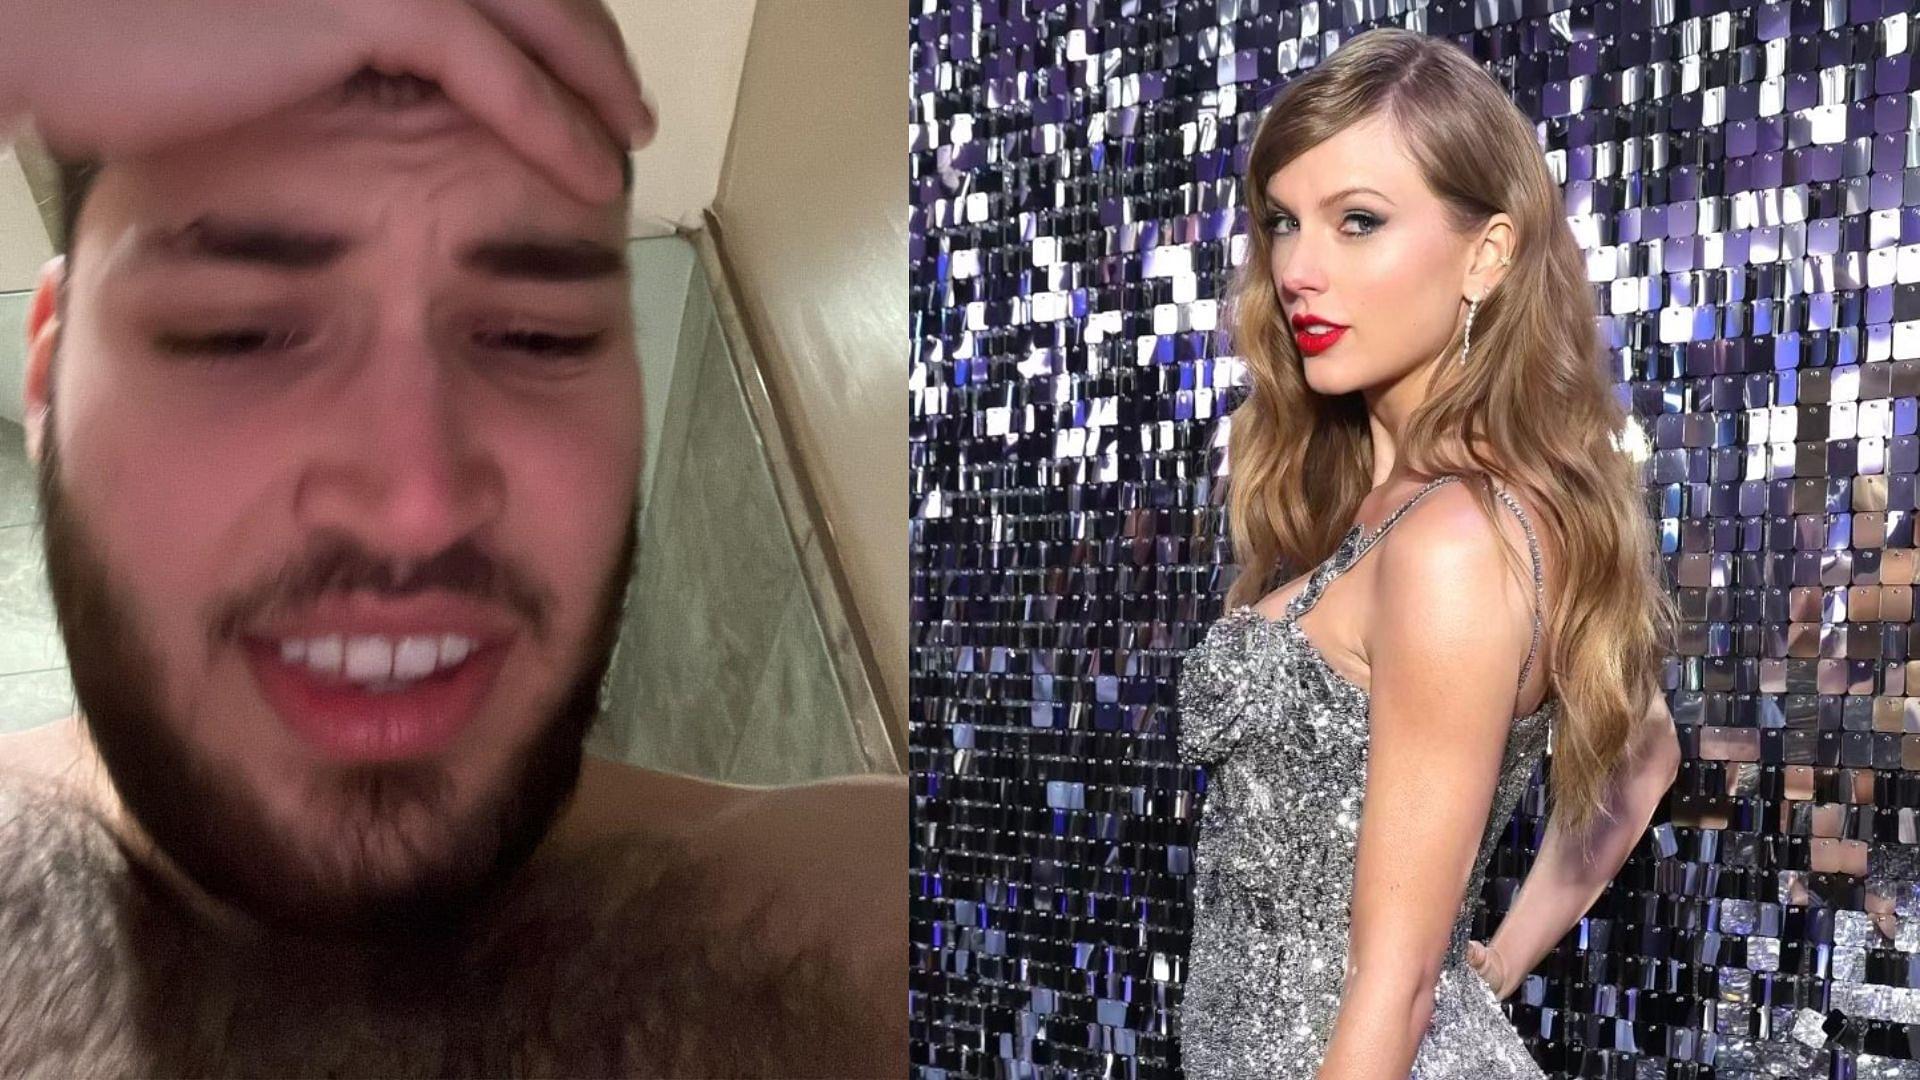 Adin Ross calls out Taylor Swift for the Chief's win and his betting loss at the Super Bowl.